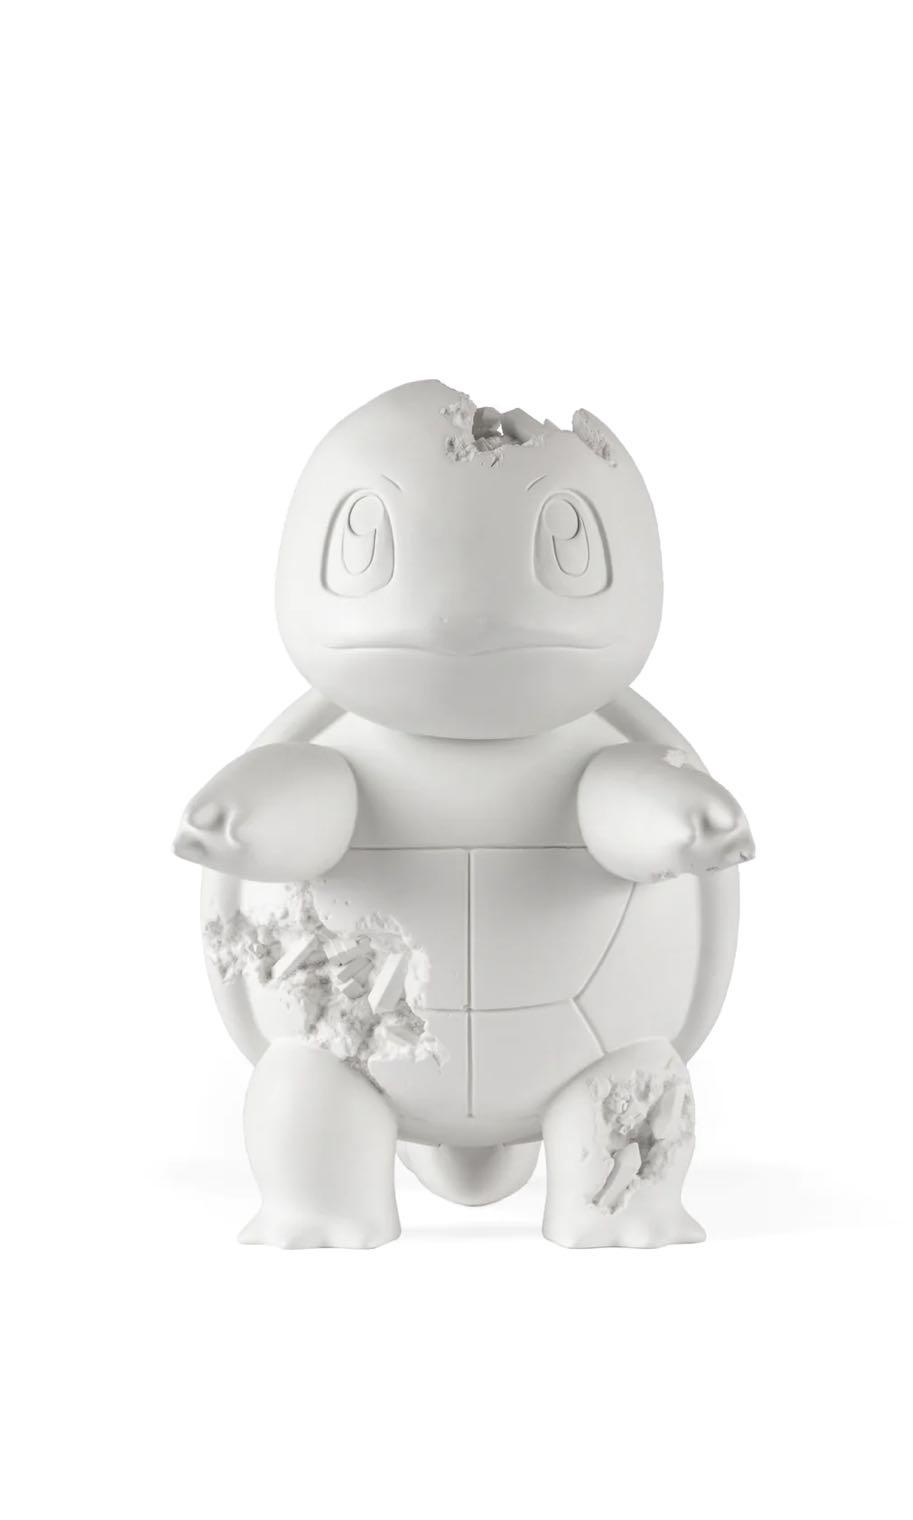 Daniel Arsham x Pokemon Crystalized Squirtle Figure (Edition of 